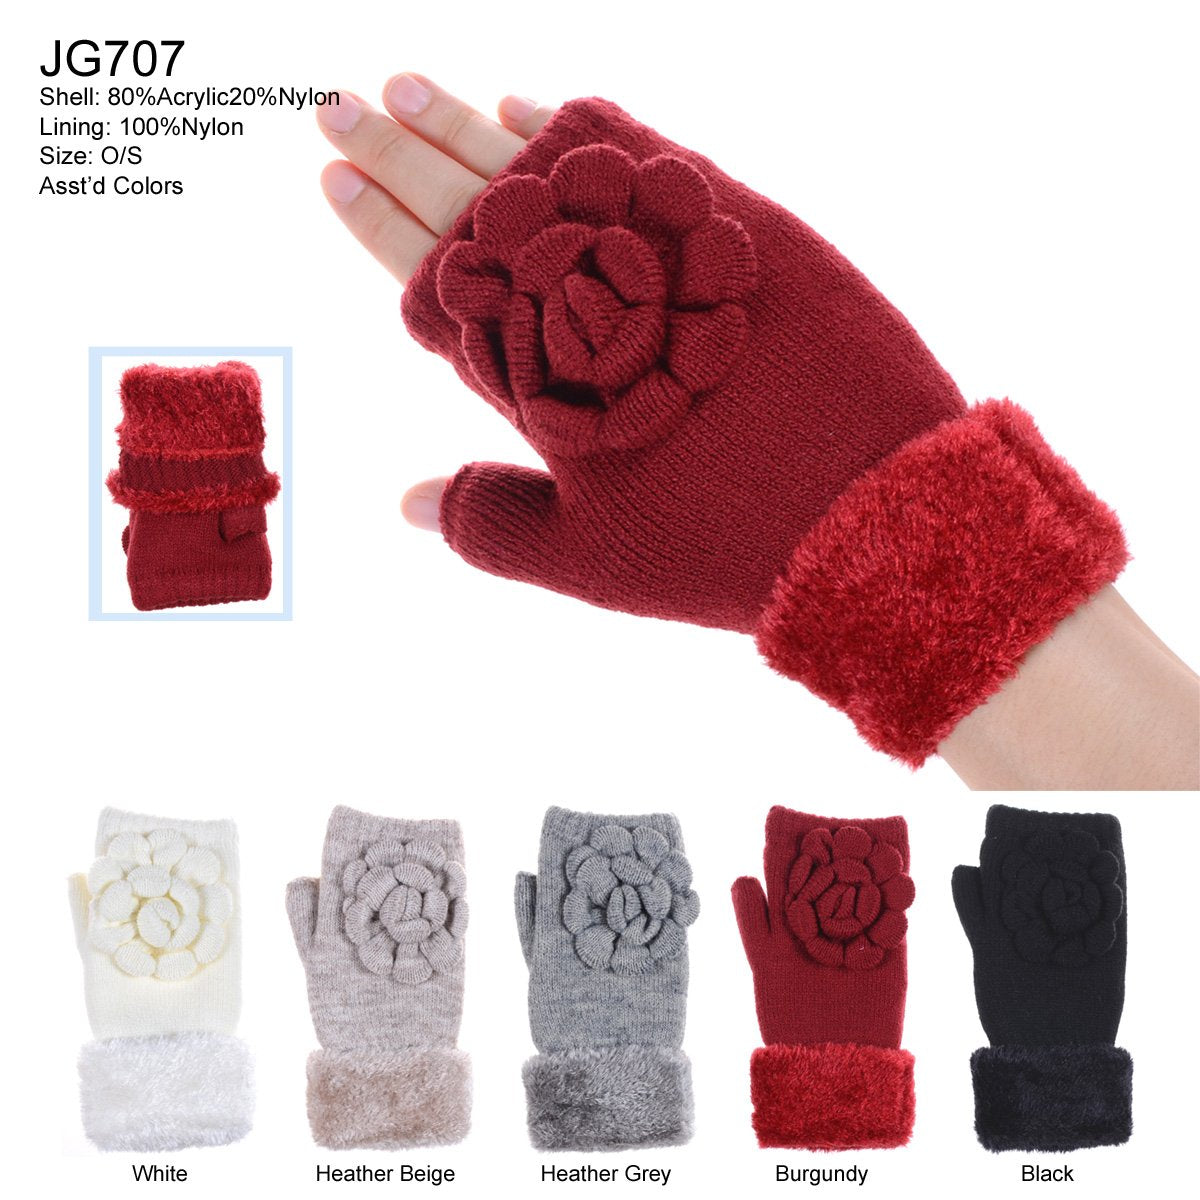 Solid Color Knitted Fingerless Gloves W/ Flower Detail, Cuffs, & Chenille Lining - 12Pc Set